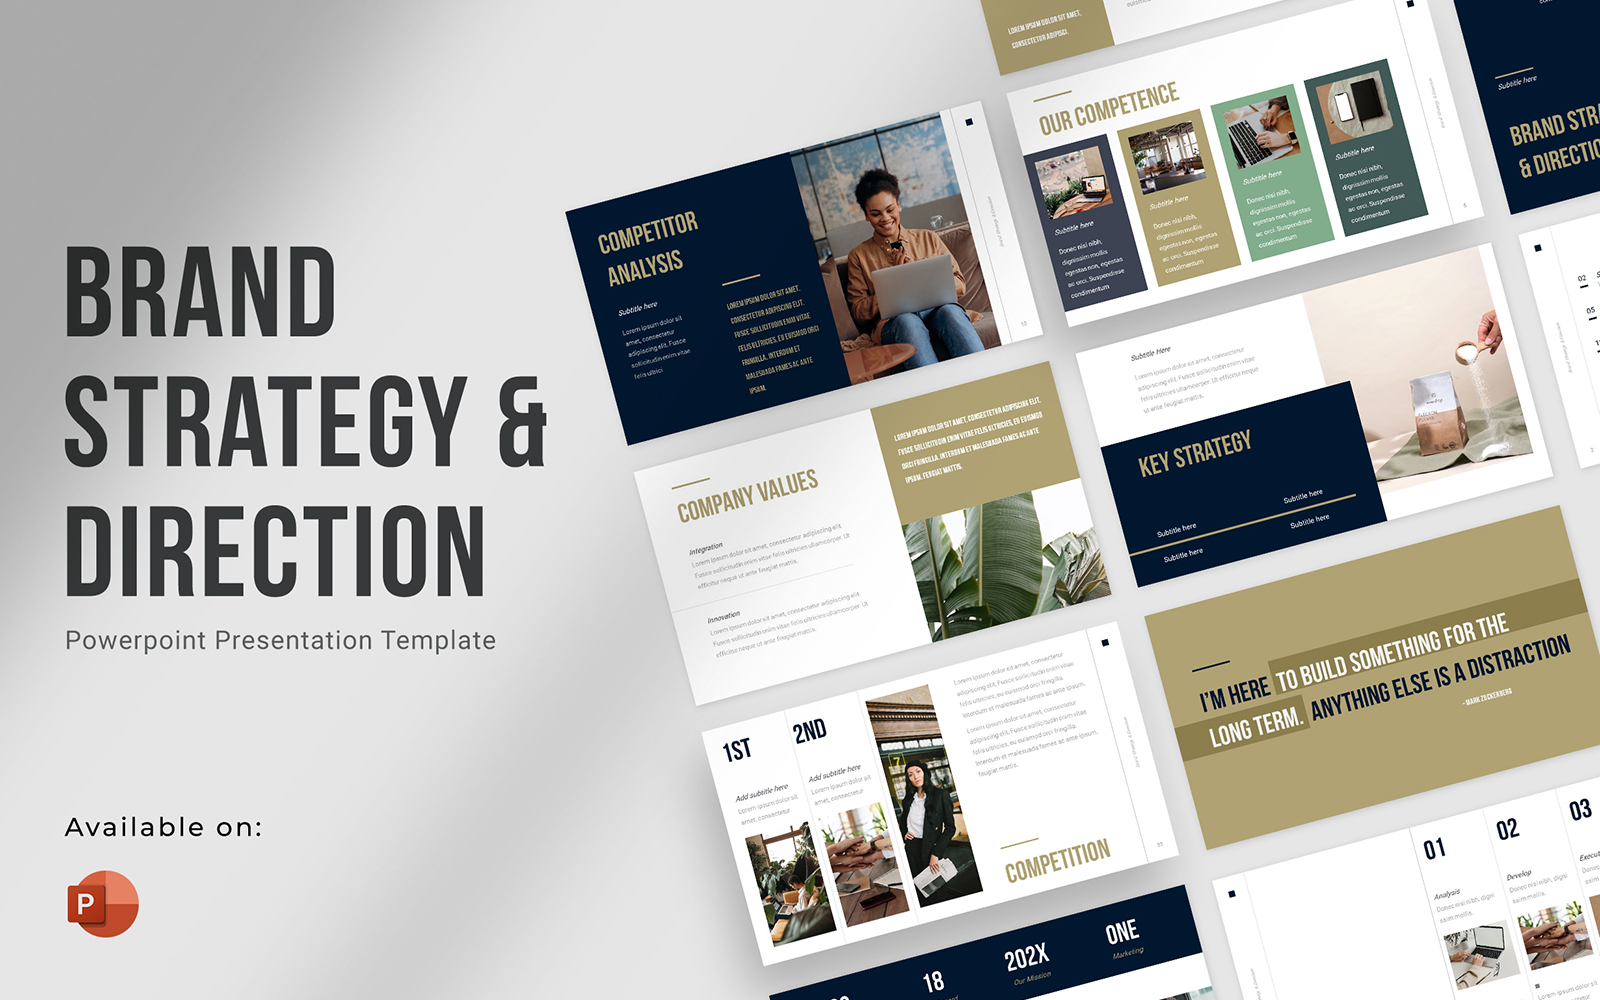 Brand Strategy & Direction Powerpoint Template